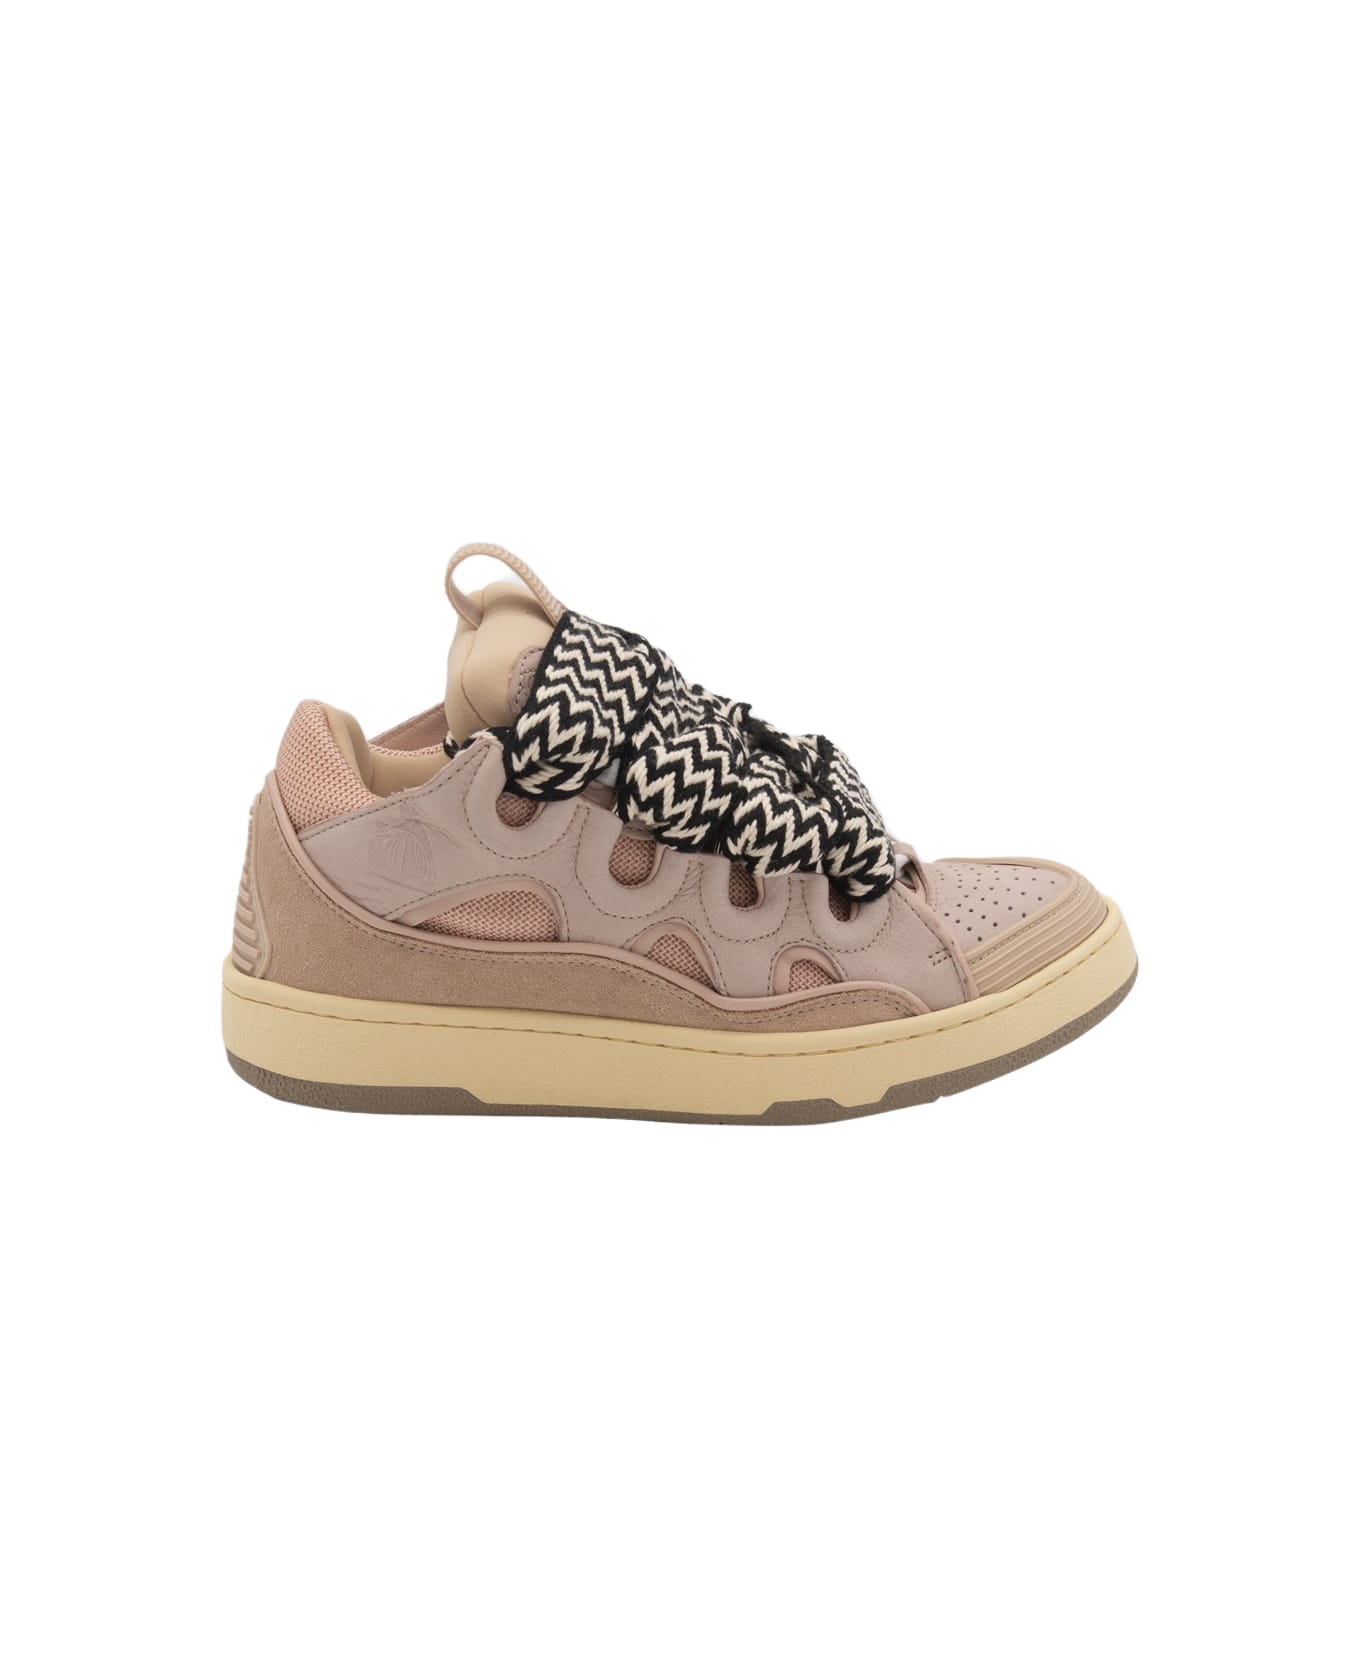 Lanvin Pink Leather Curb Sneakers - PALE PINK